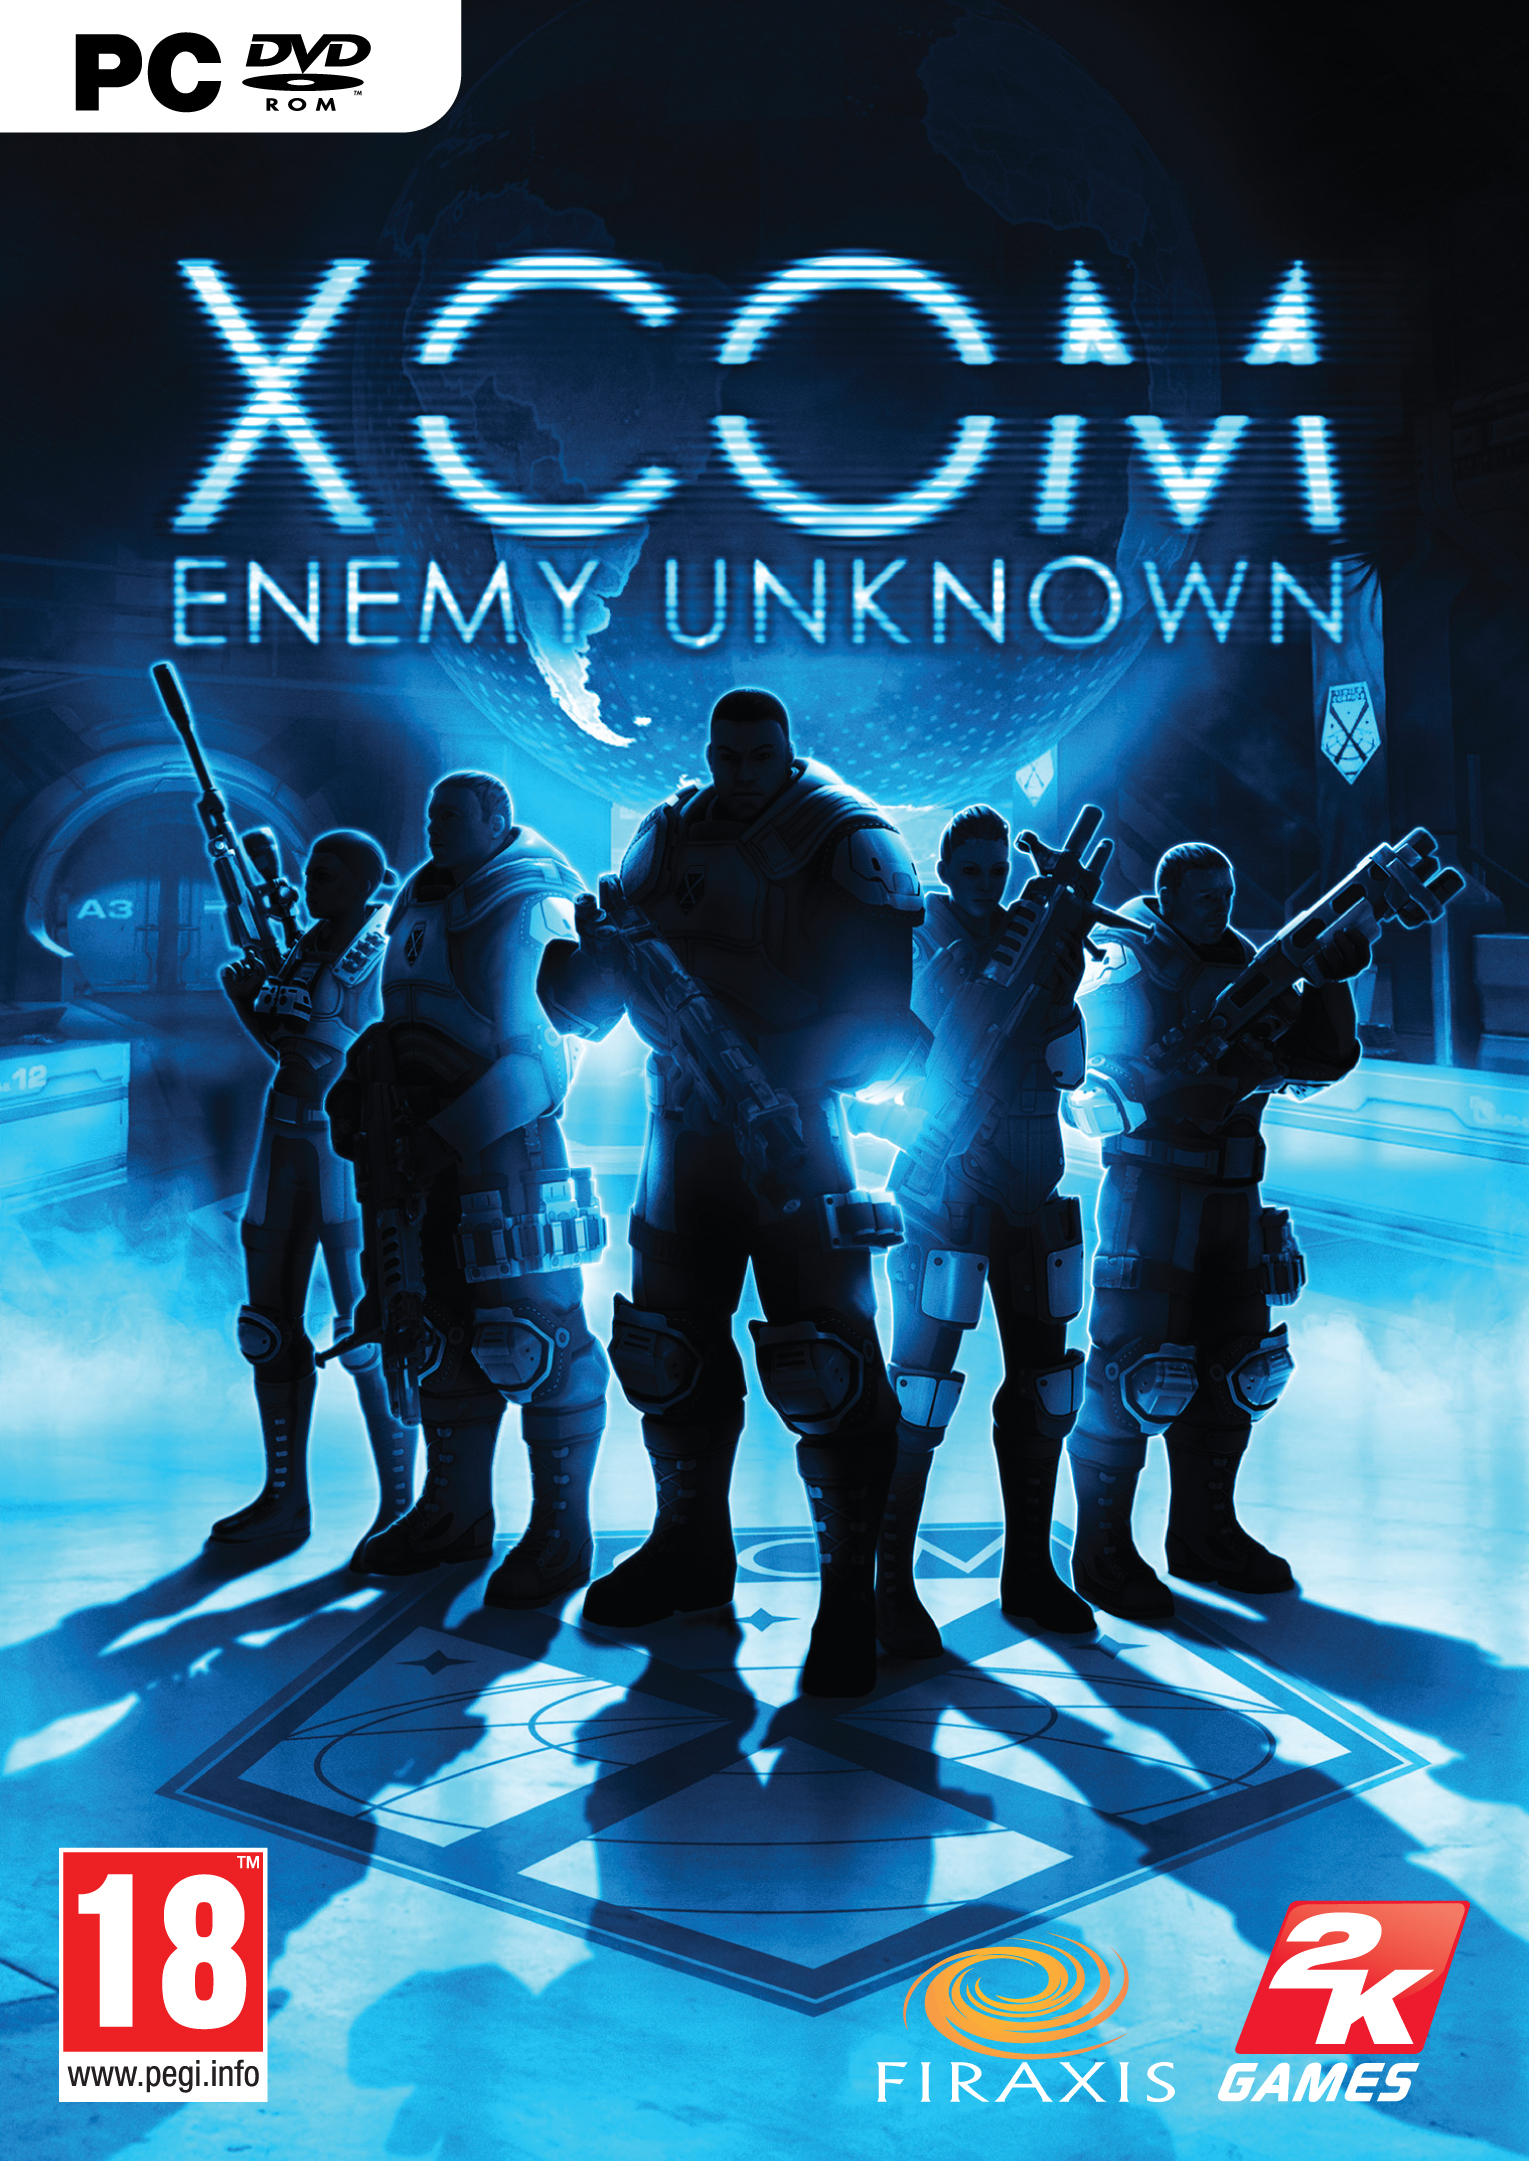 Get a XCOM: Enemy Unknown CD Key From Mining Cryptocurrency